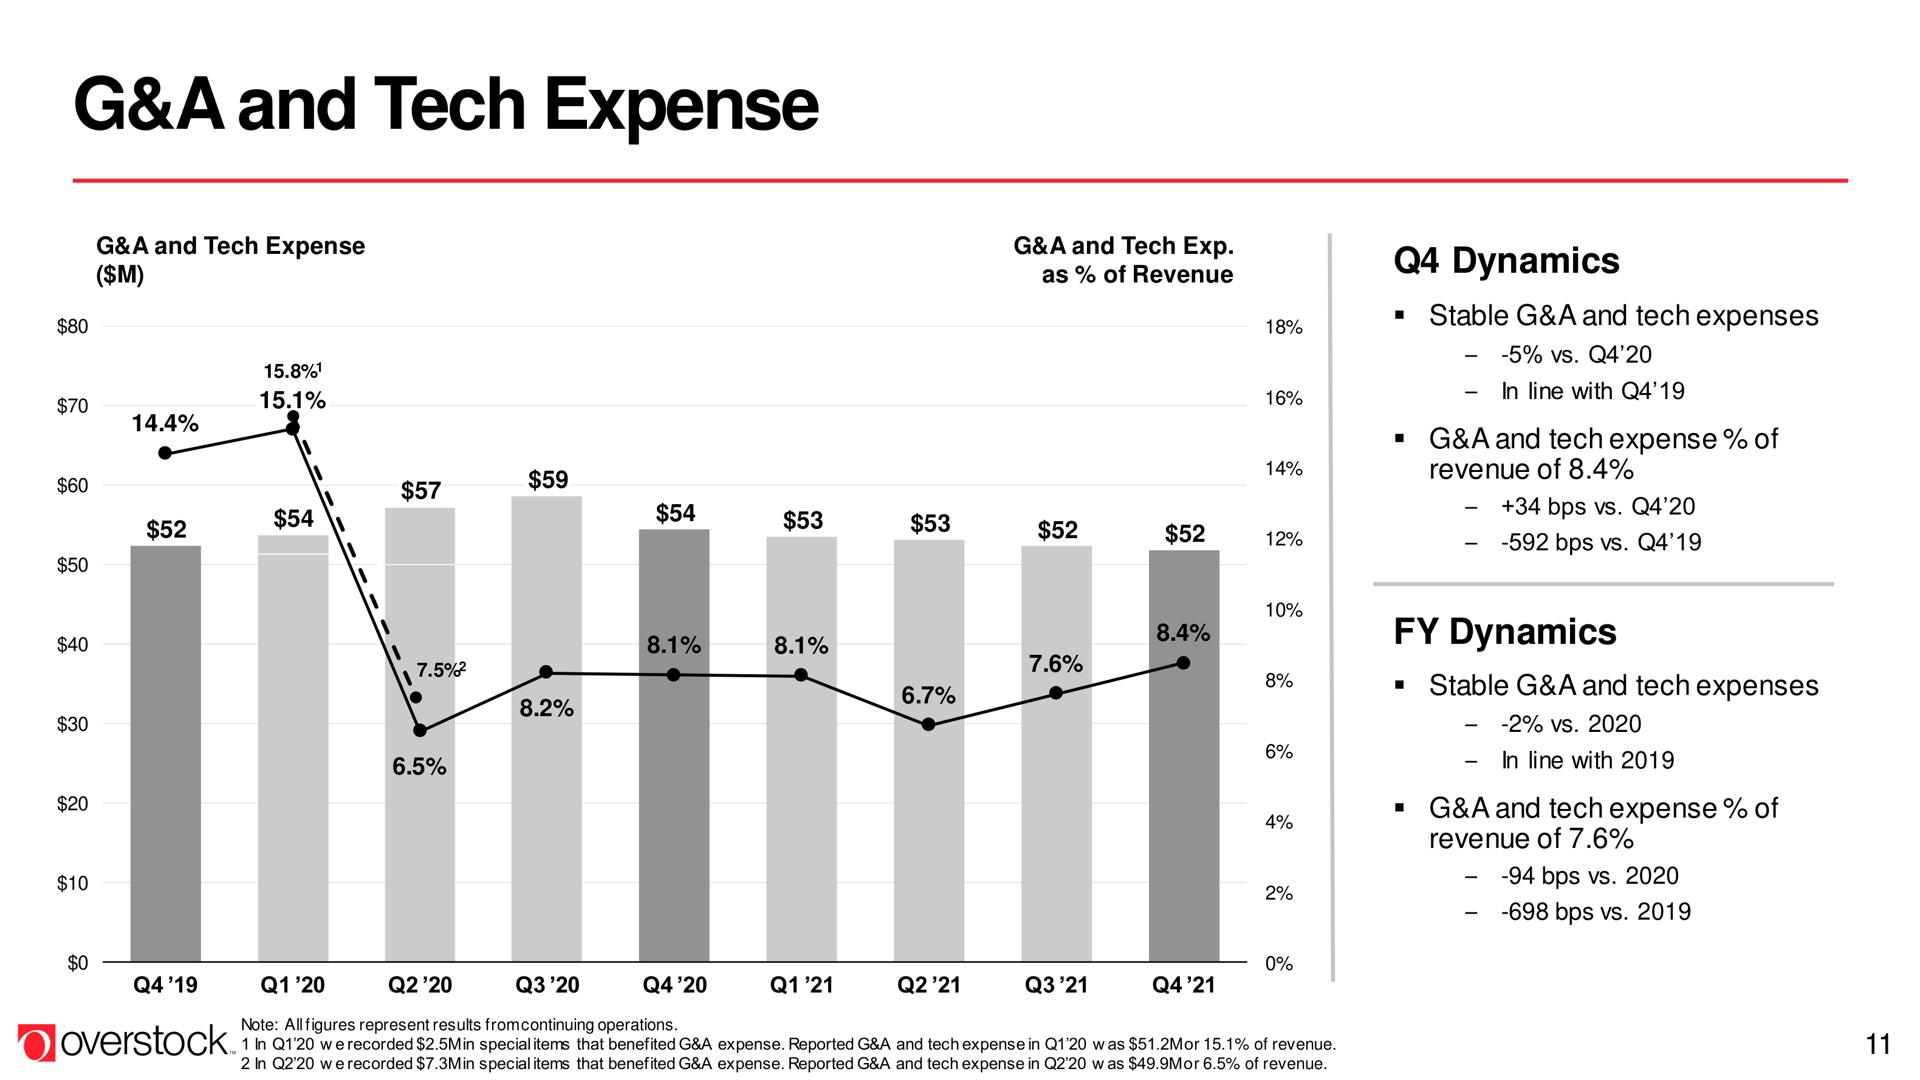 a and tech expense | Overstock